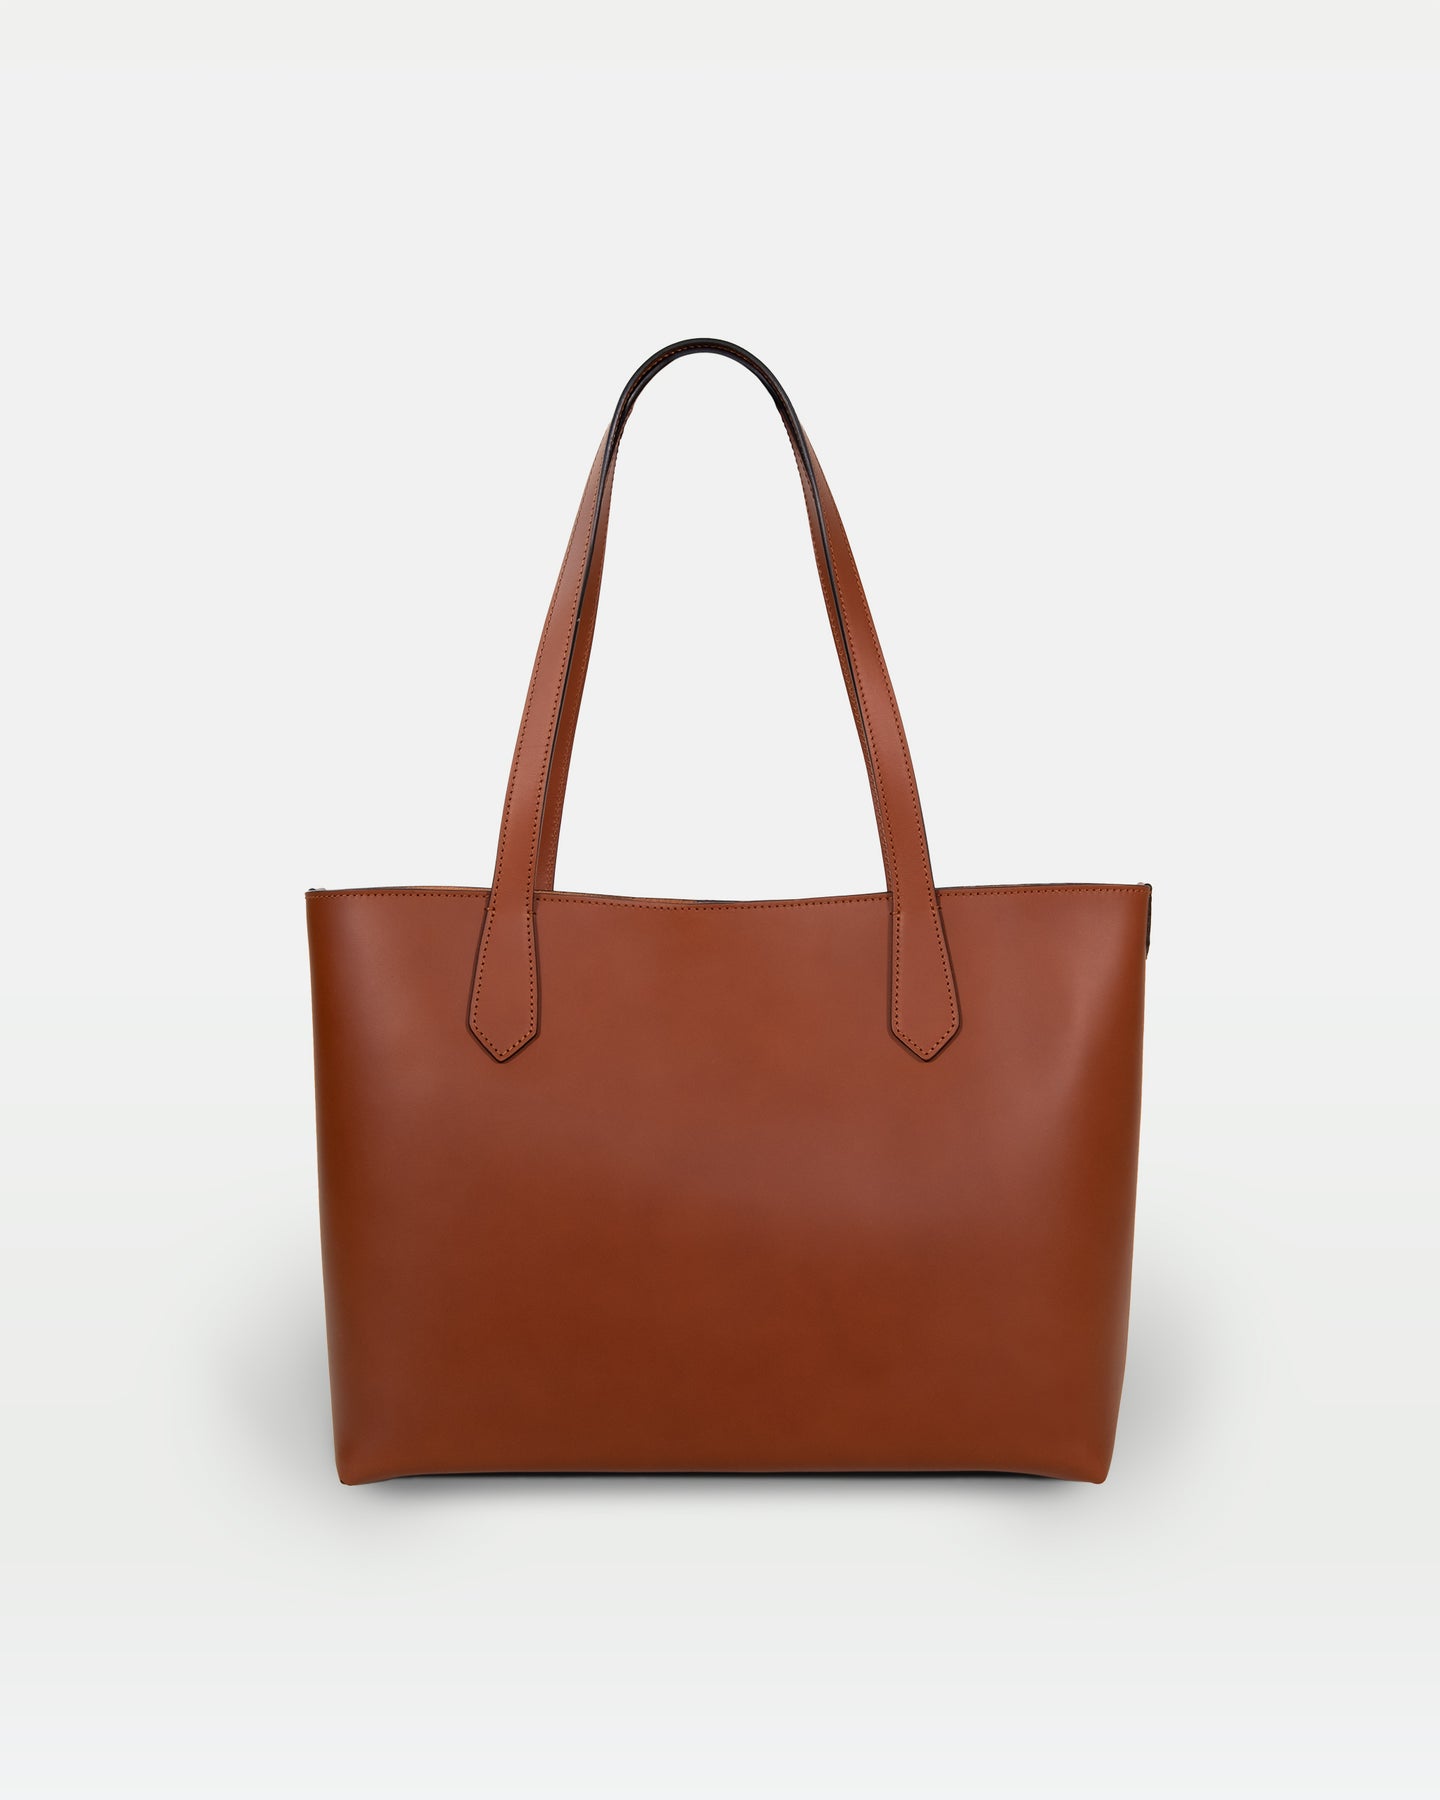 Buy Elba mini leather bag, Small Tote, leather bags for women